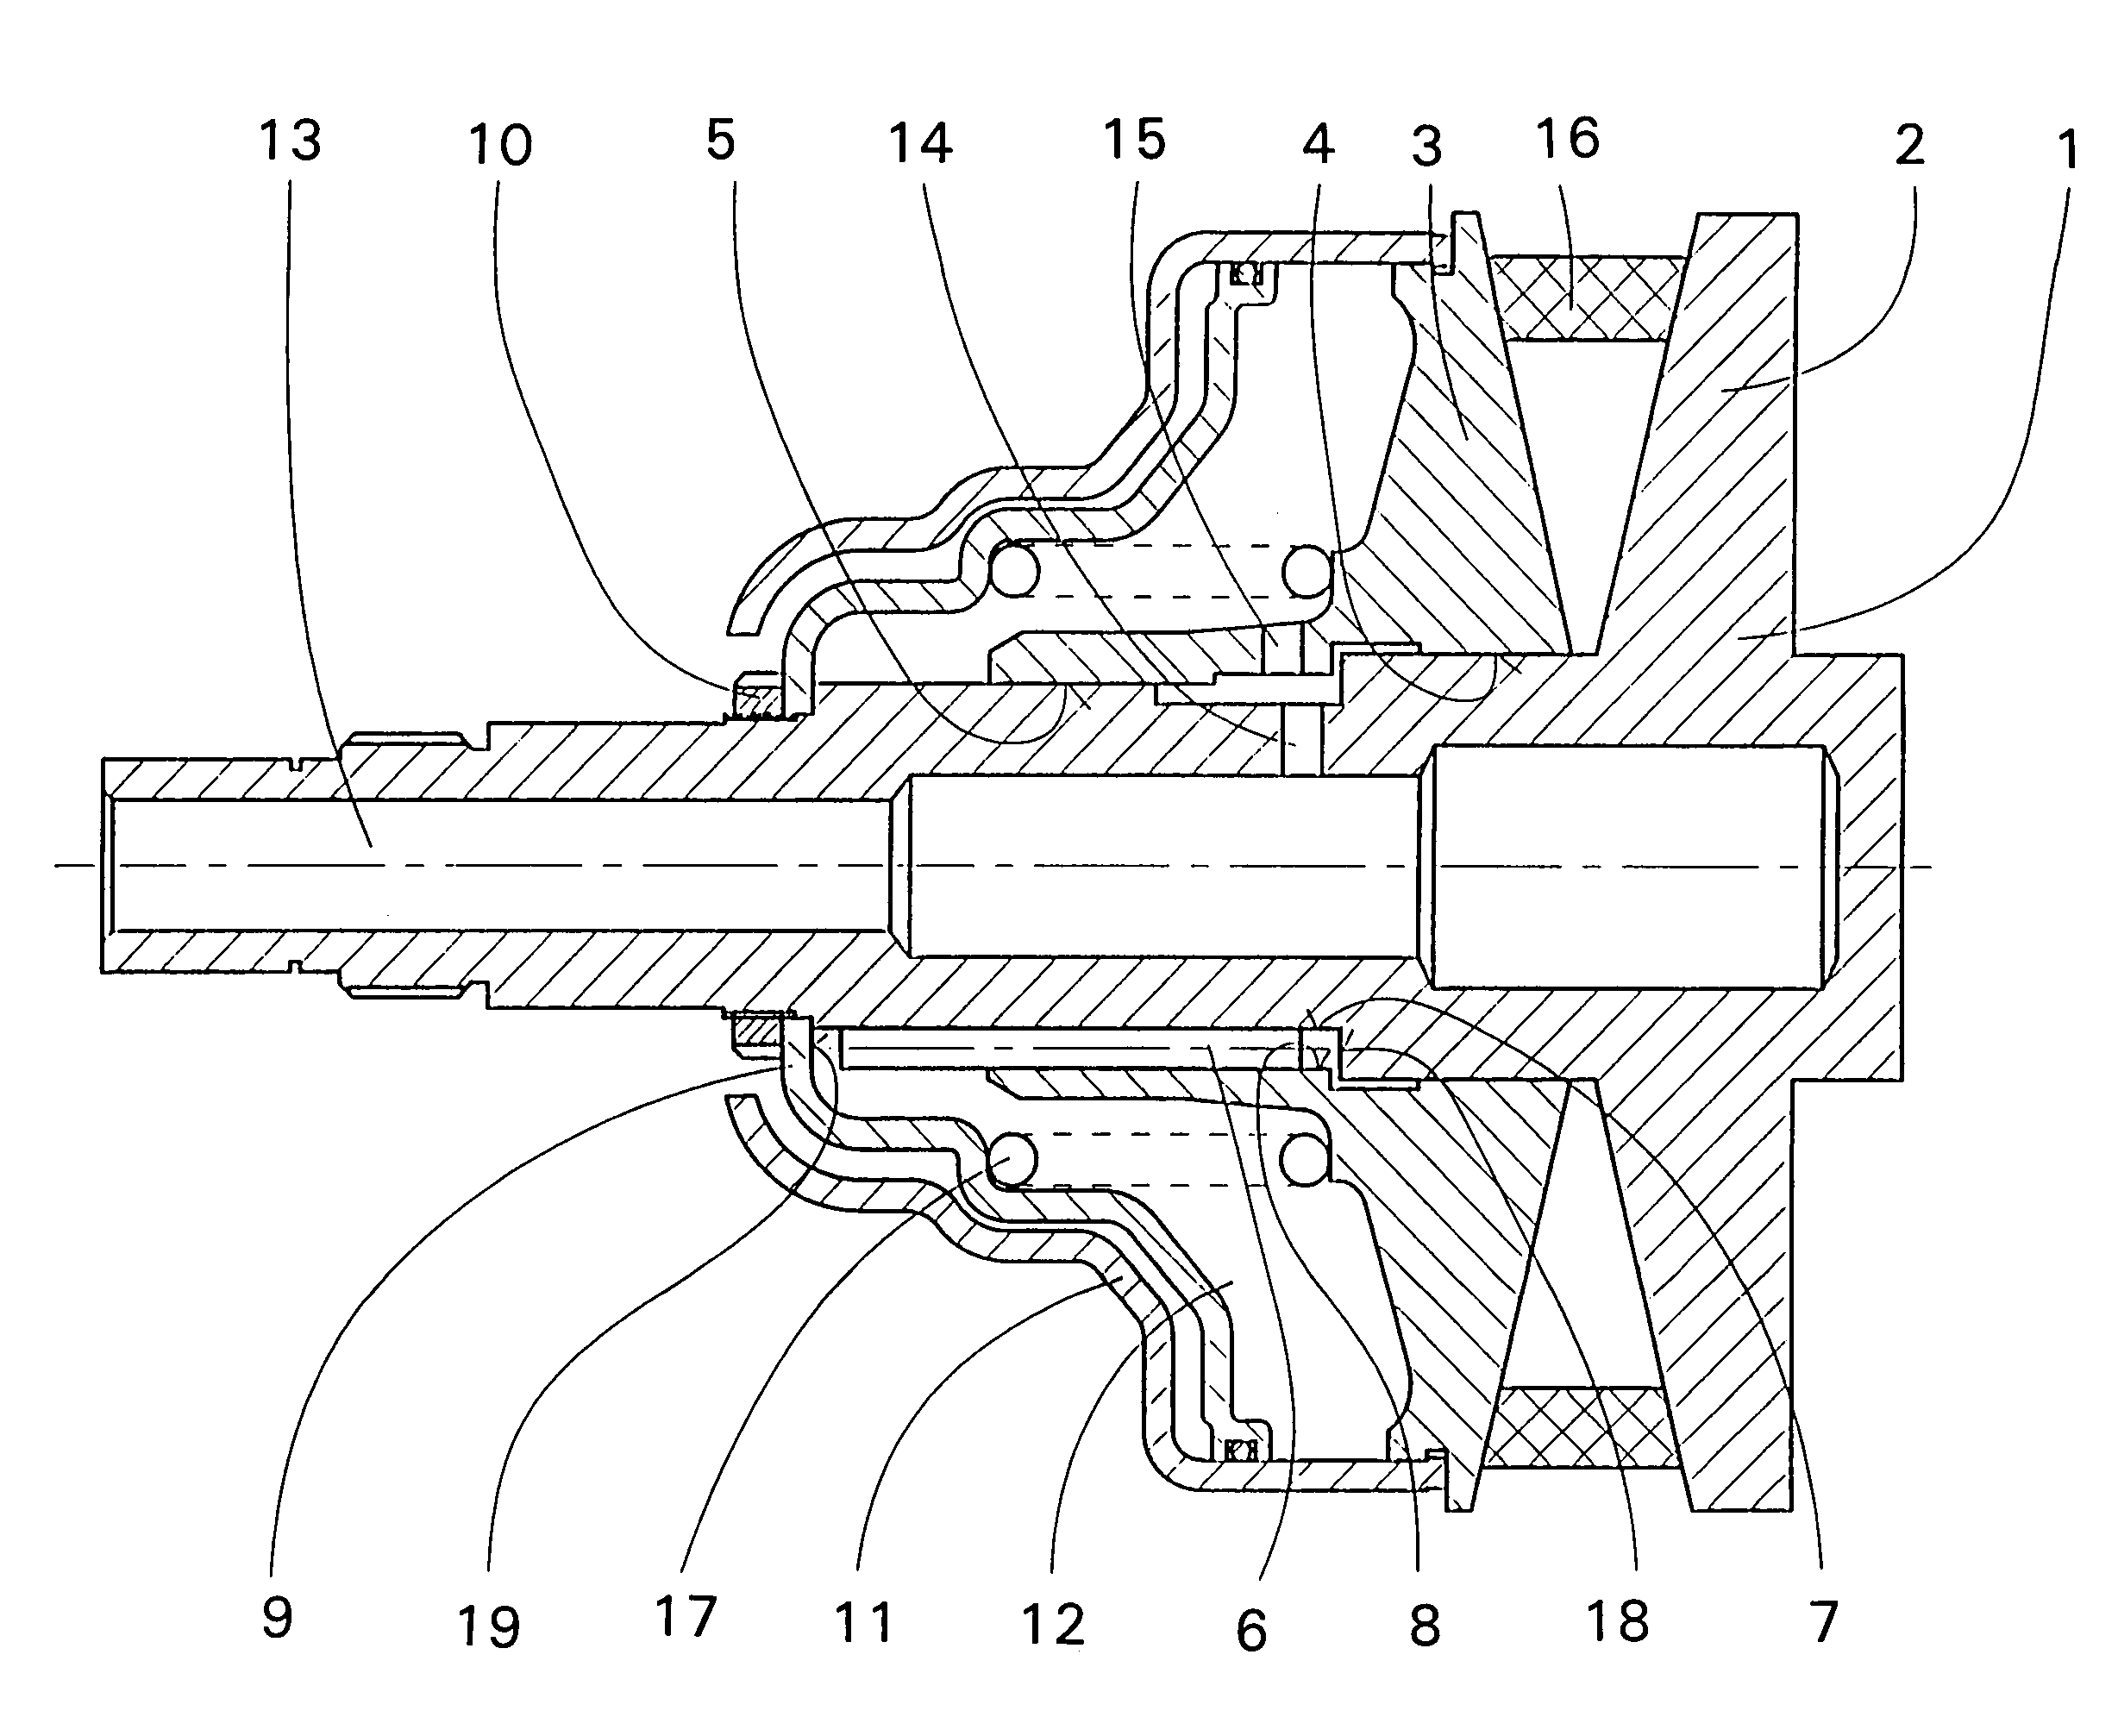 Device for guiding a moveable conical pulley disc of a CVT variator